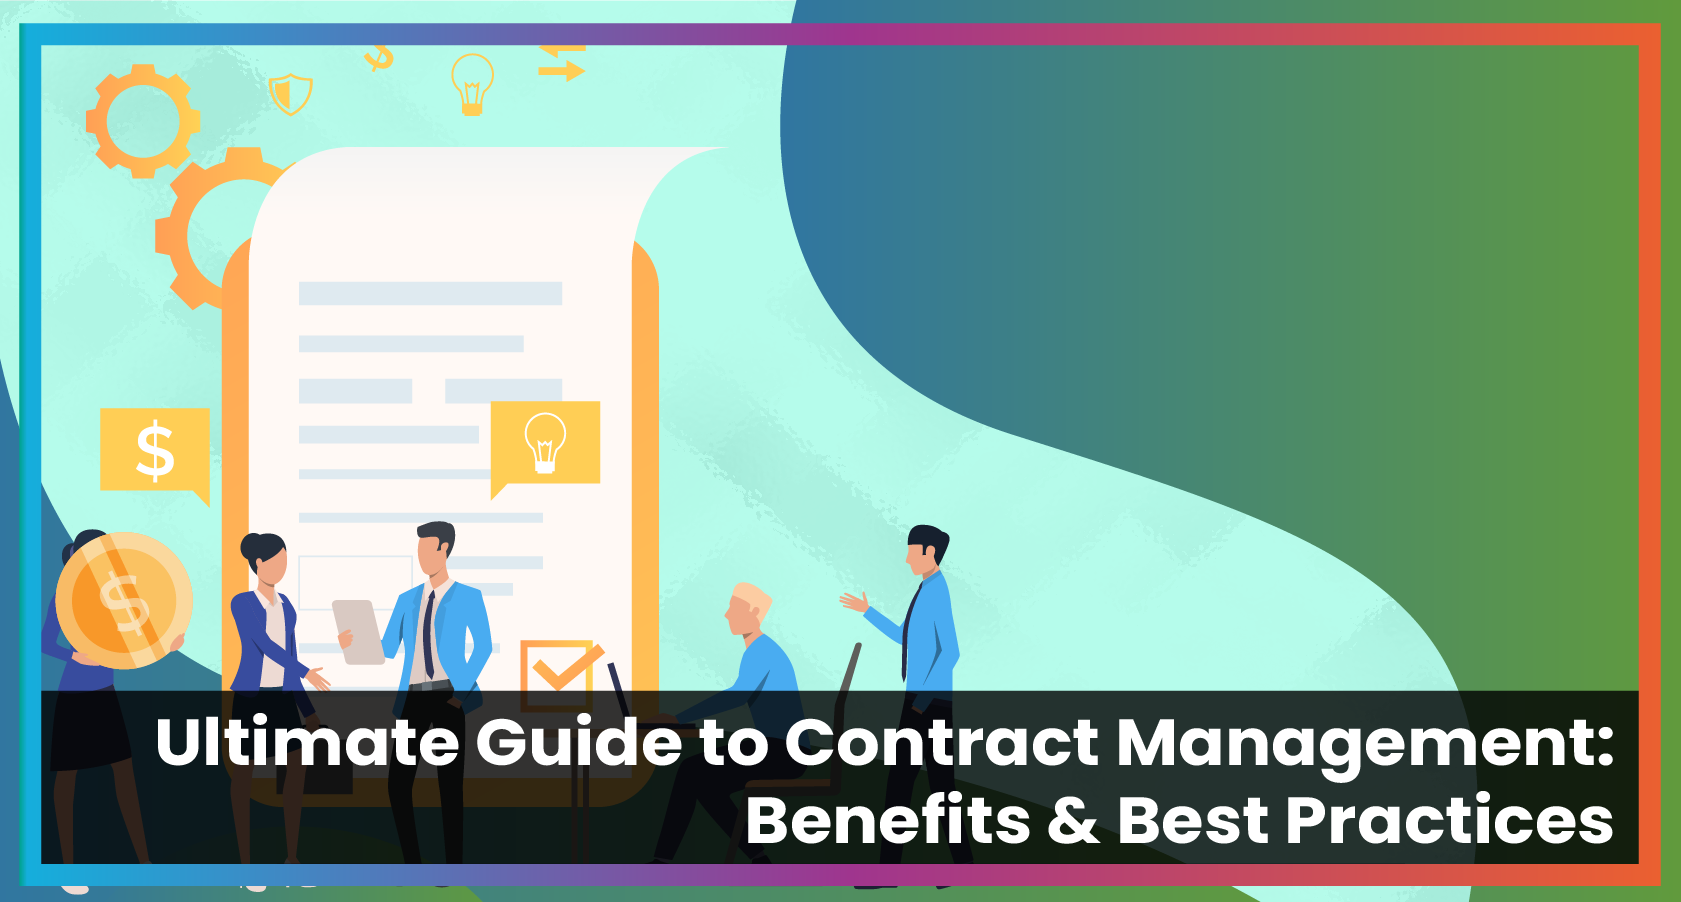 Ultimate Guide to Contract Management: Benefits & Best Practices